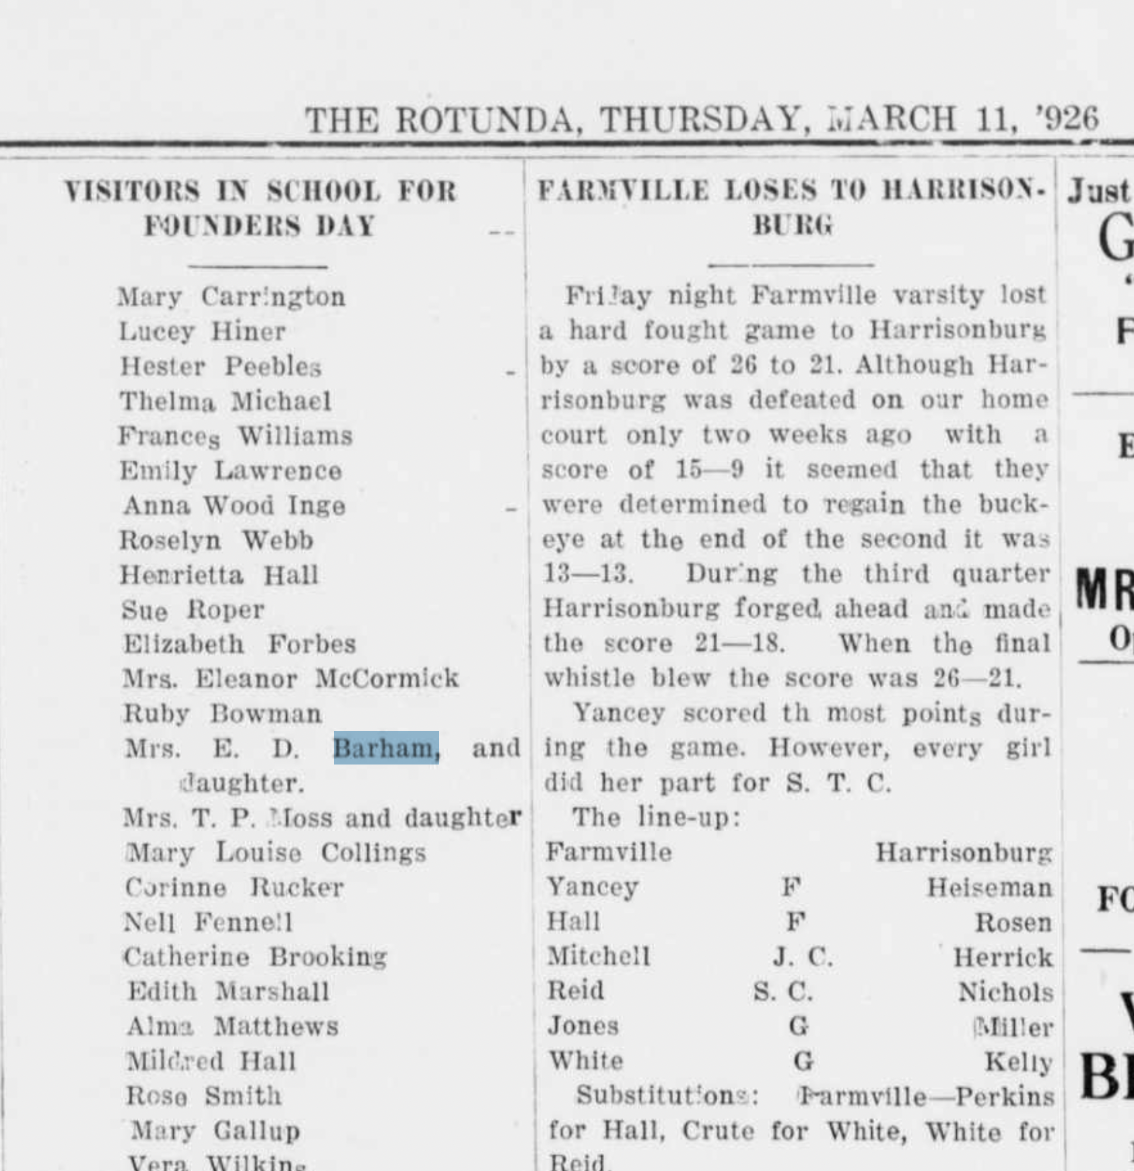 An edition of Rotunda from March 1926 lists Louise Grey Hamlin Barham and her daughter as visitors to the college for Founders Day.